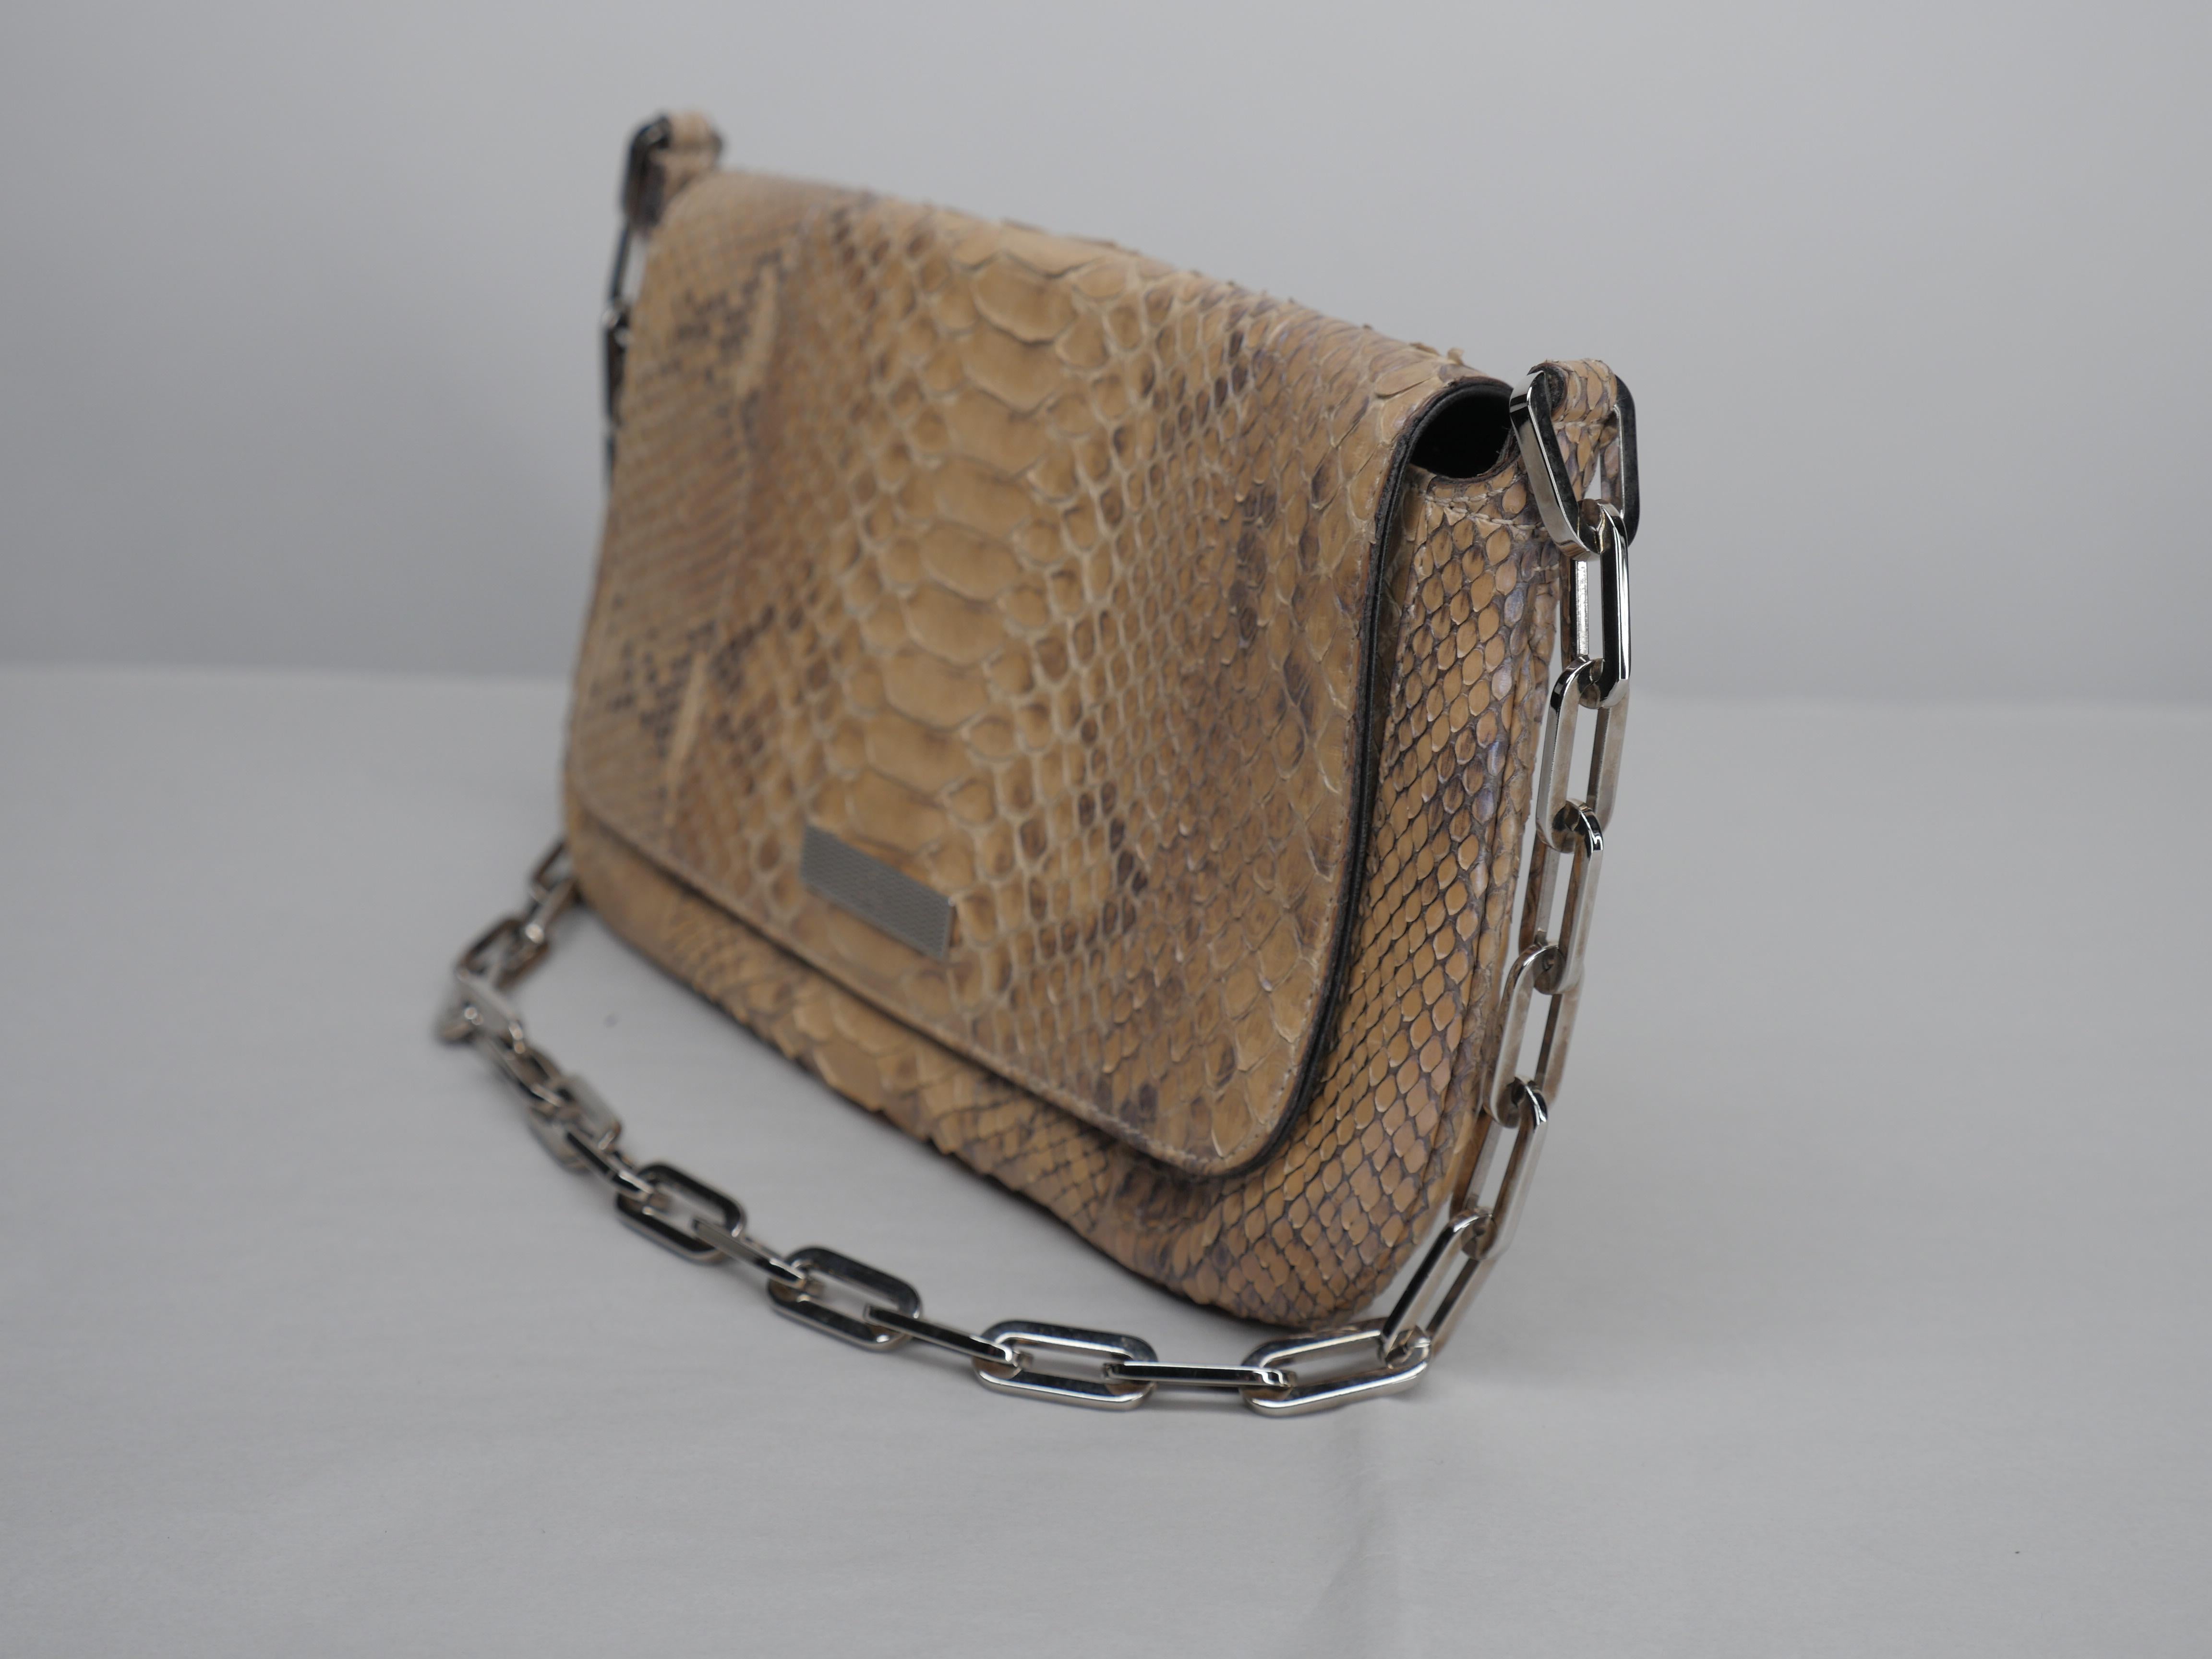 Gucci Tan Small Python Flap Shoulder Bag with Chain Link Strap 1